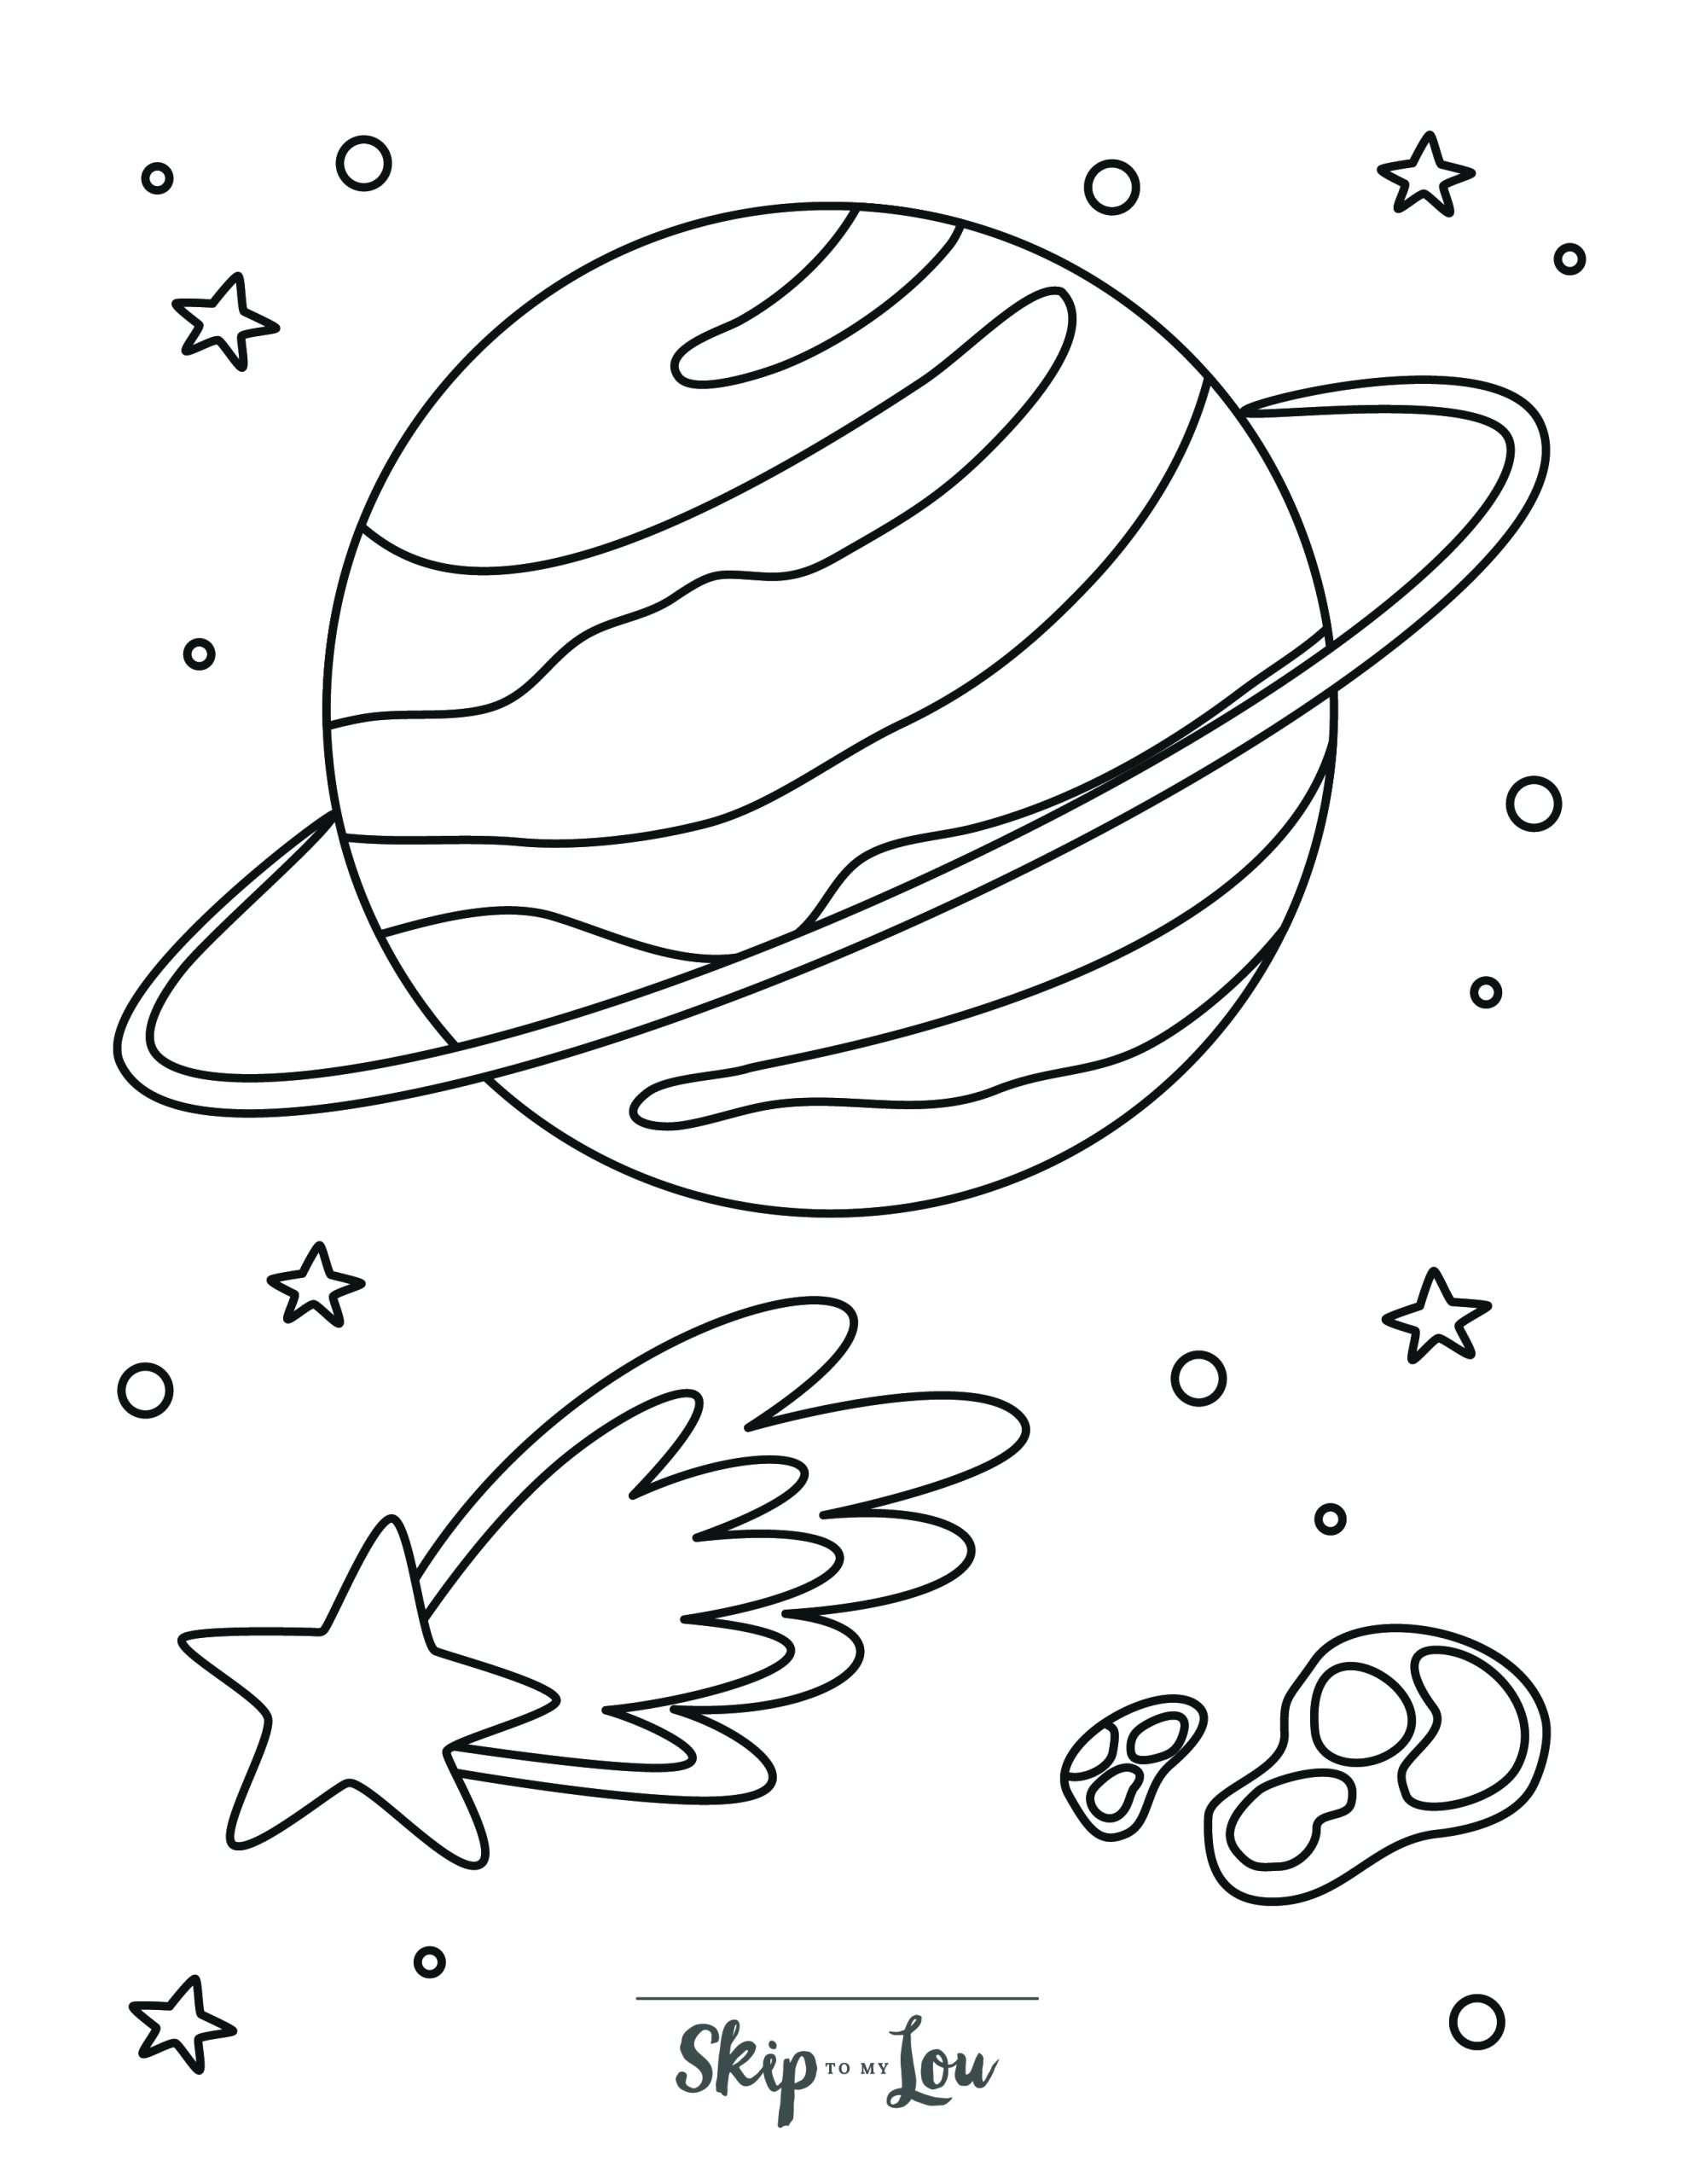 Space Coloring Page 3 - Planet Neptune with stars in background